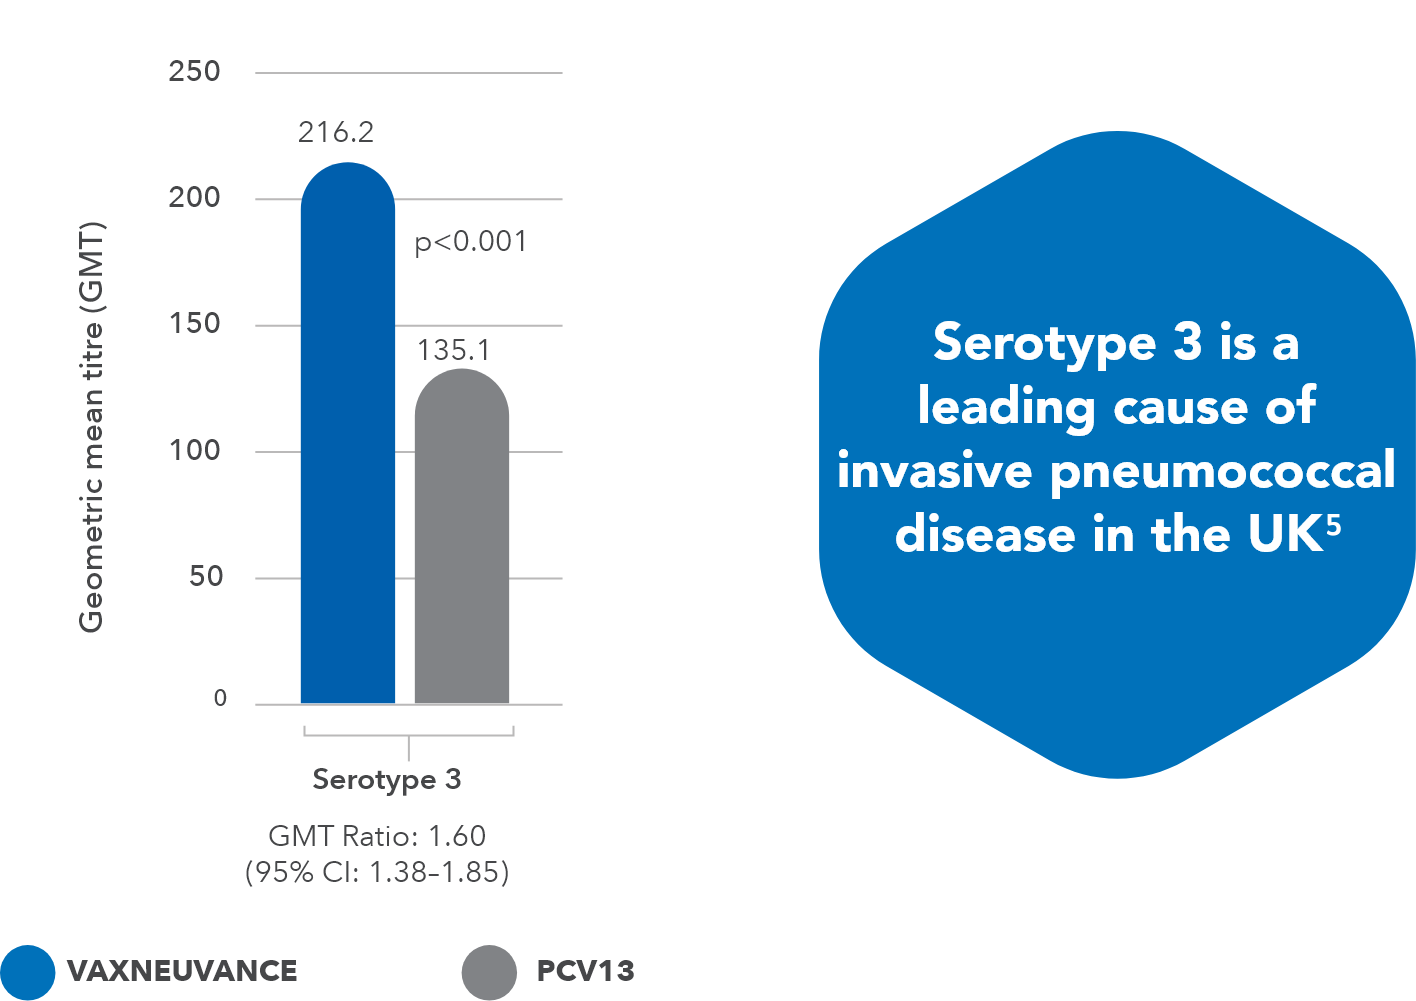 Serotype 3 is a leading cause of invasive pneumococcal disease in the UK - ref 5